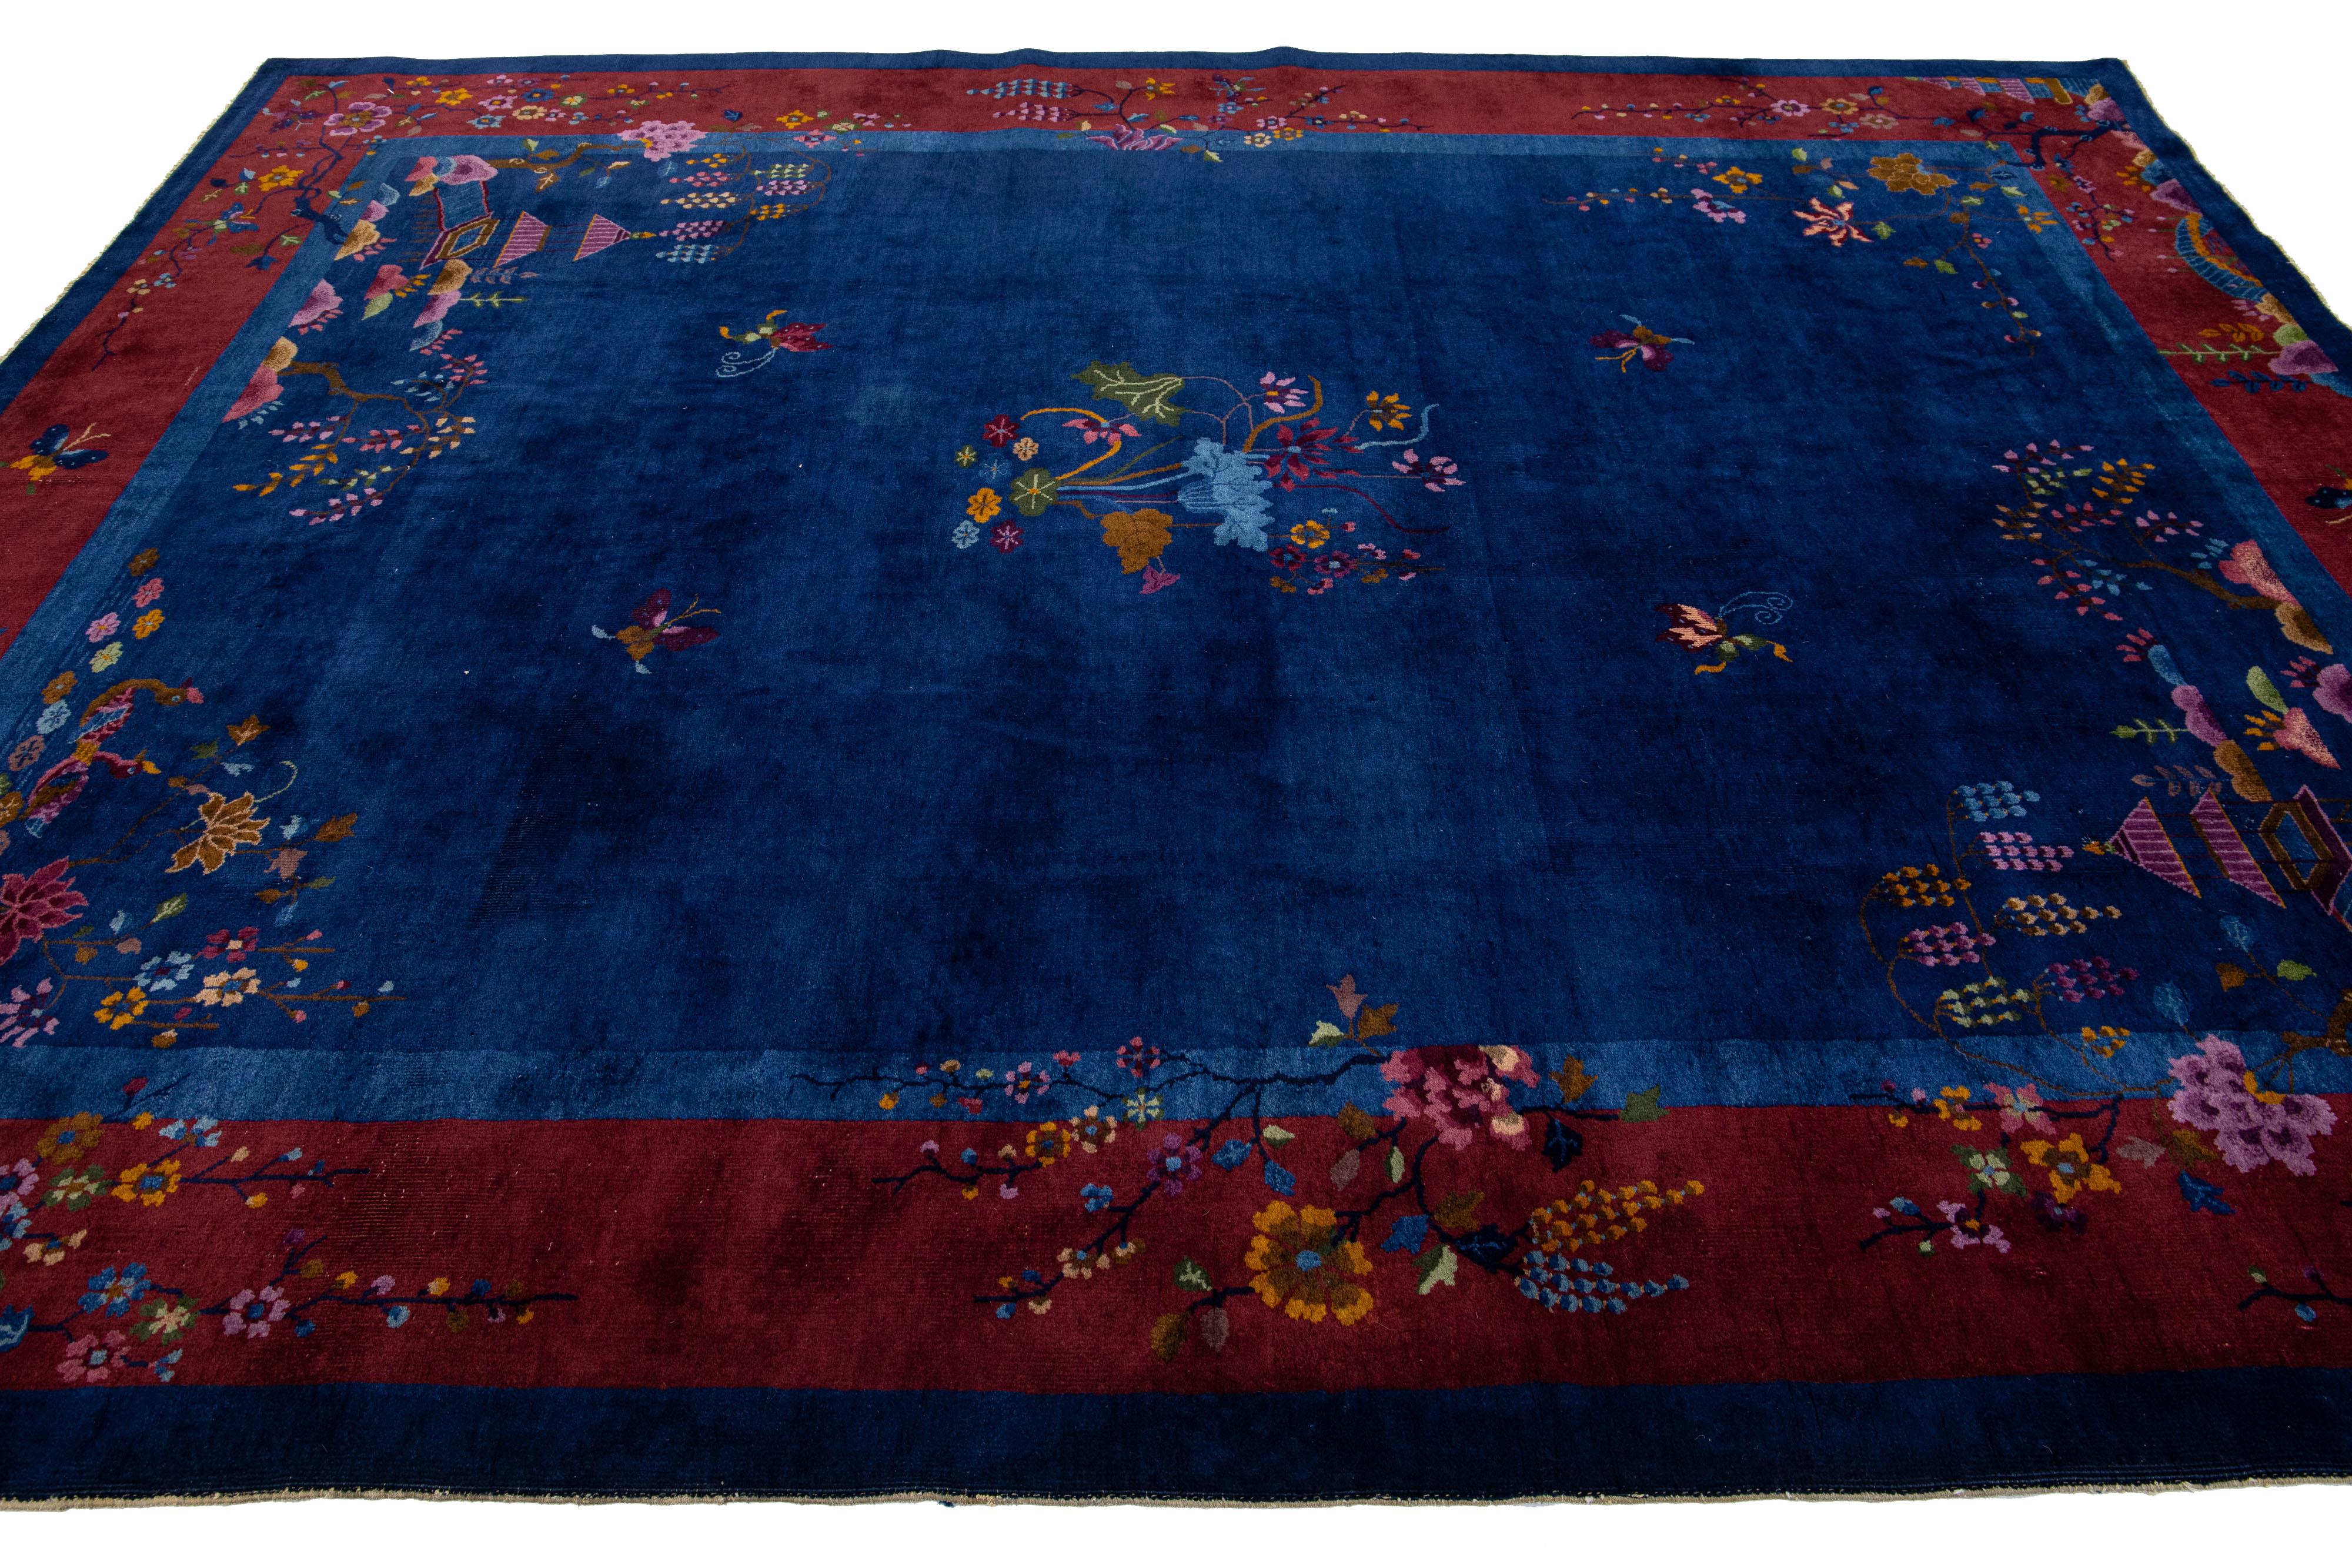 20th Century Antique Art Deco Handmade Blue Chinese Wool Rug Floral Design In Excellent Condition For Sale In Norwalk, CT